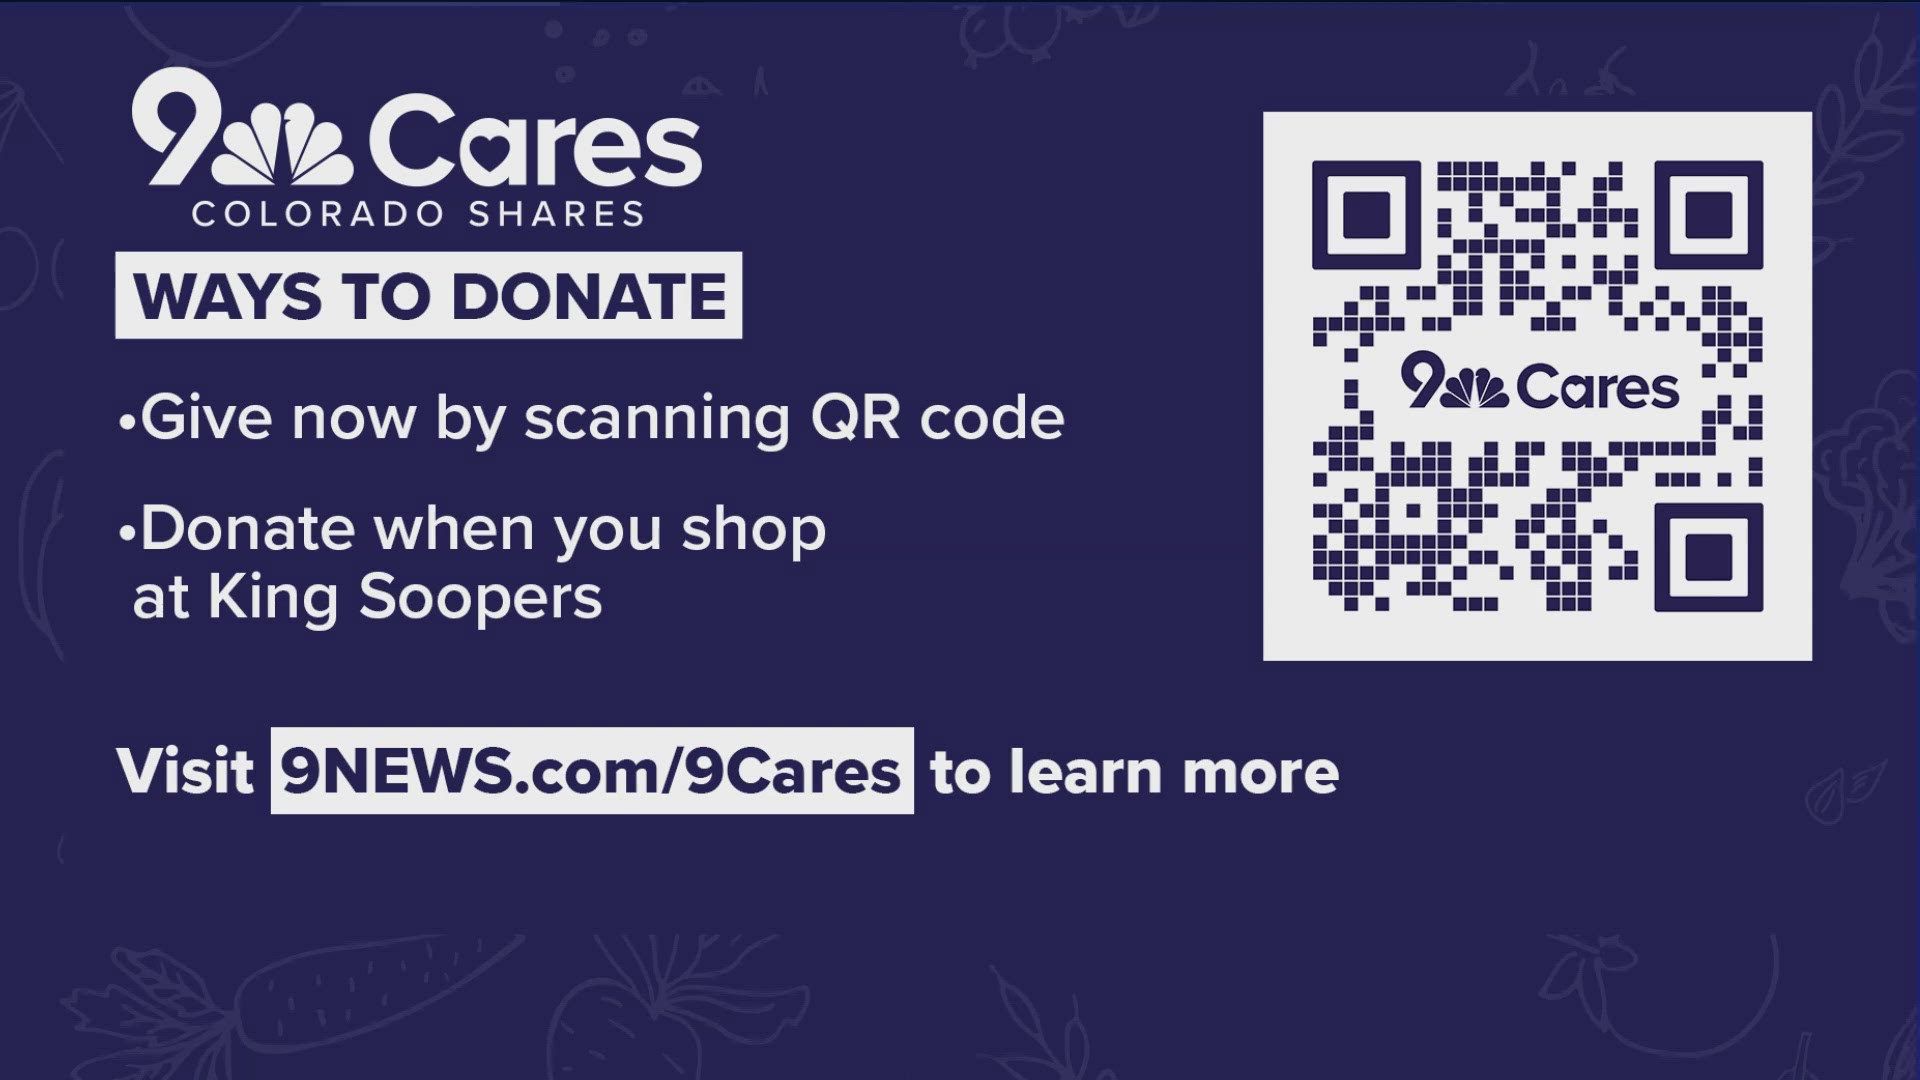 You can give now by scanning the QR code, at King Soopers, or online at 9New.com/9CaresColoradoShares. Thank you for making a difference.